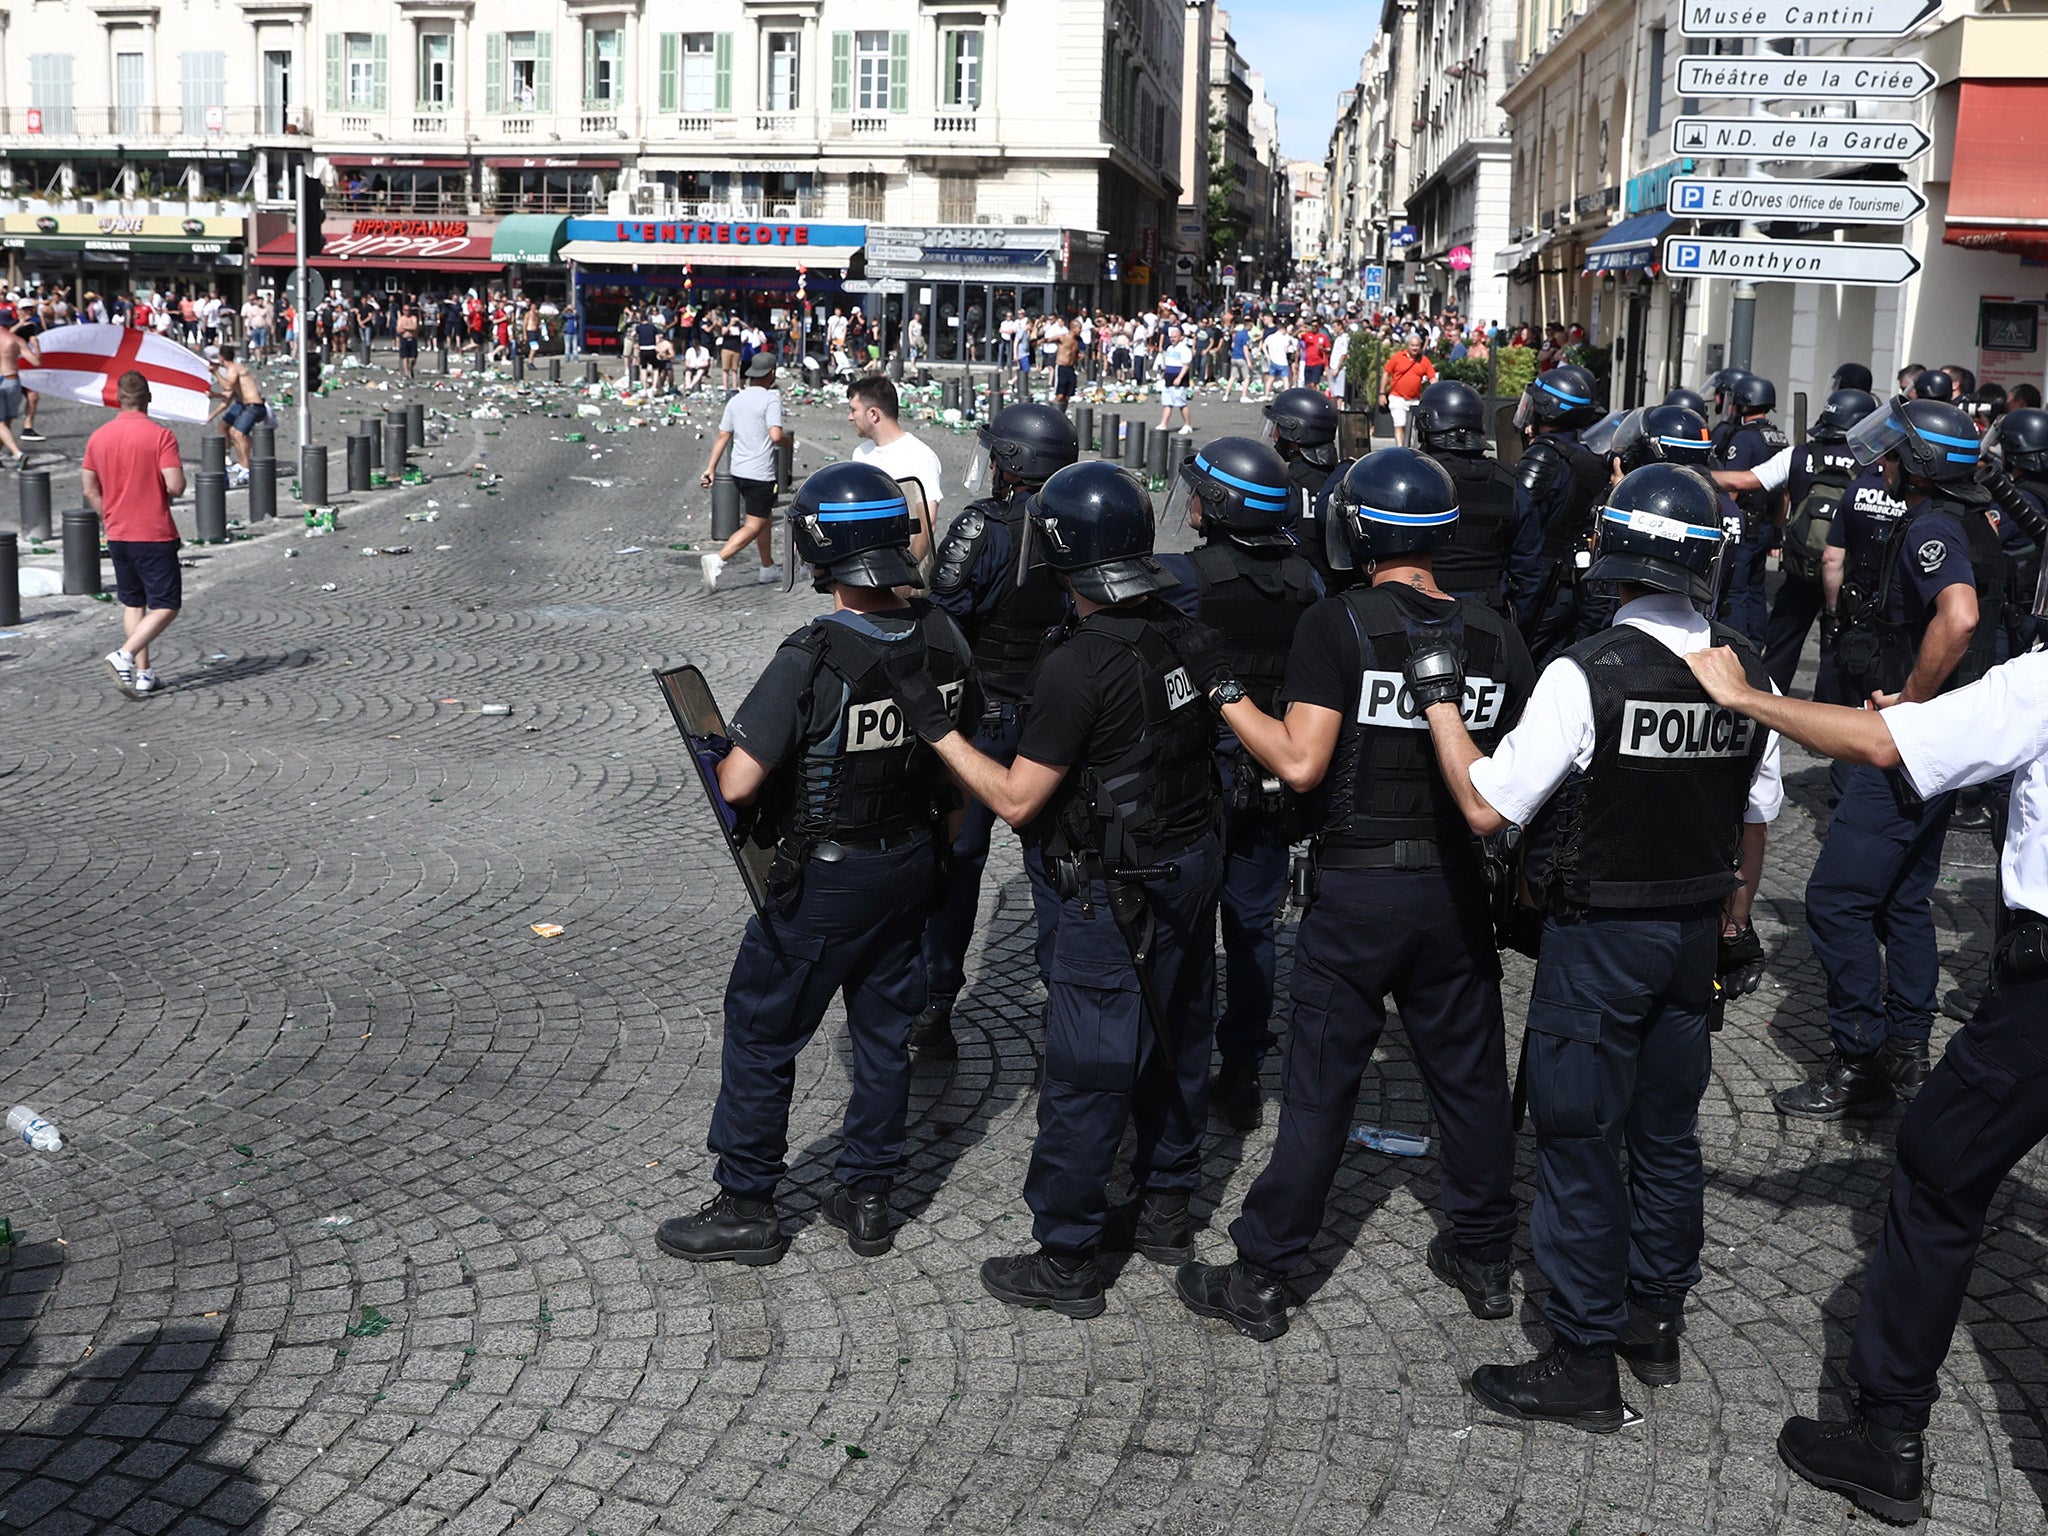 Police have faced three days of violent clashes with fans on the streets of Marseille